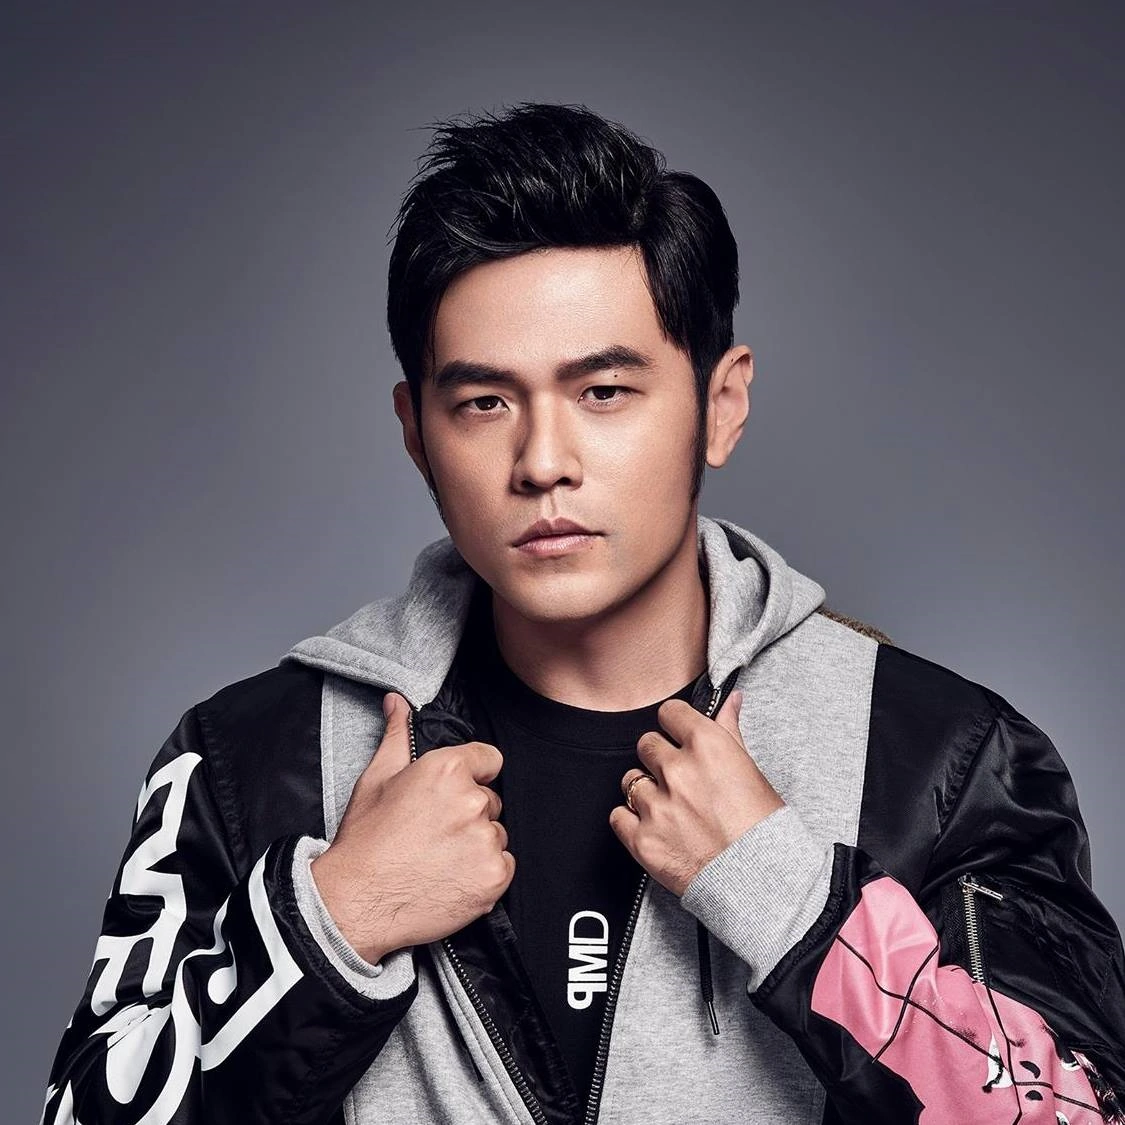 Jay Chou Bio, Wiki, Age, Height, Education, Wife, Family, Songs, Movies